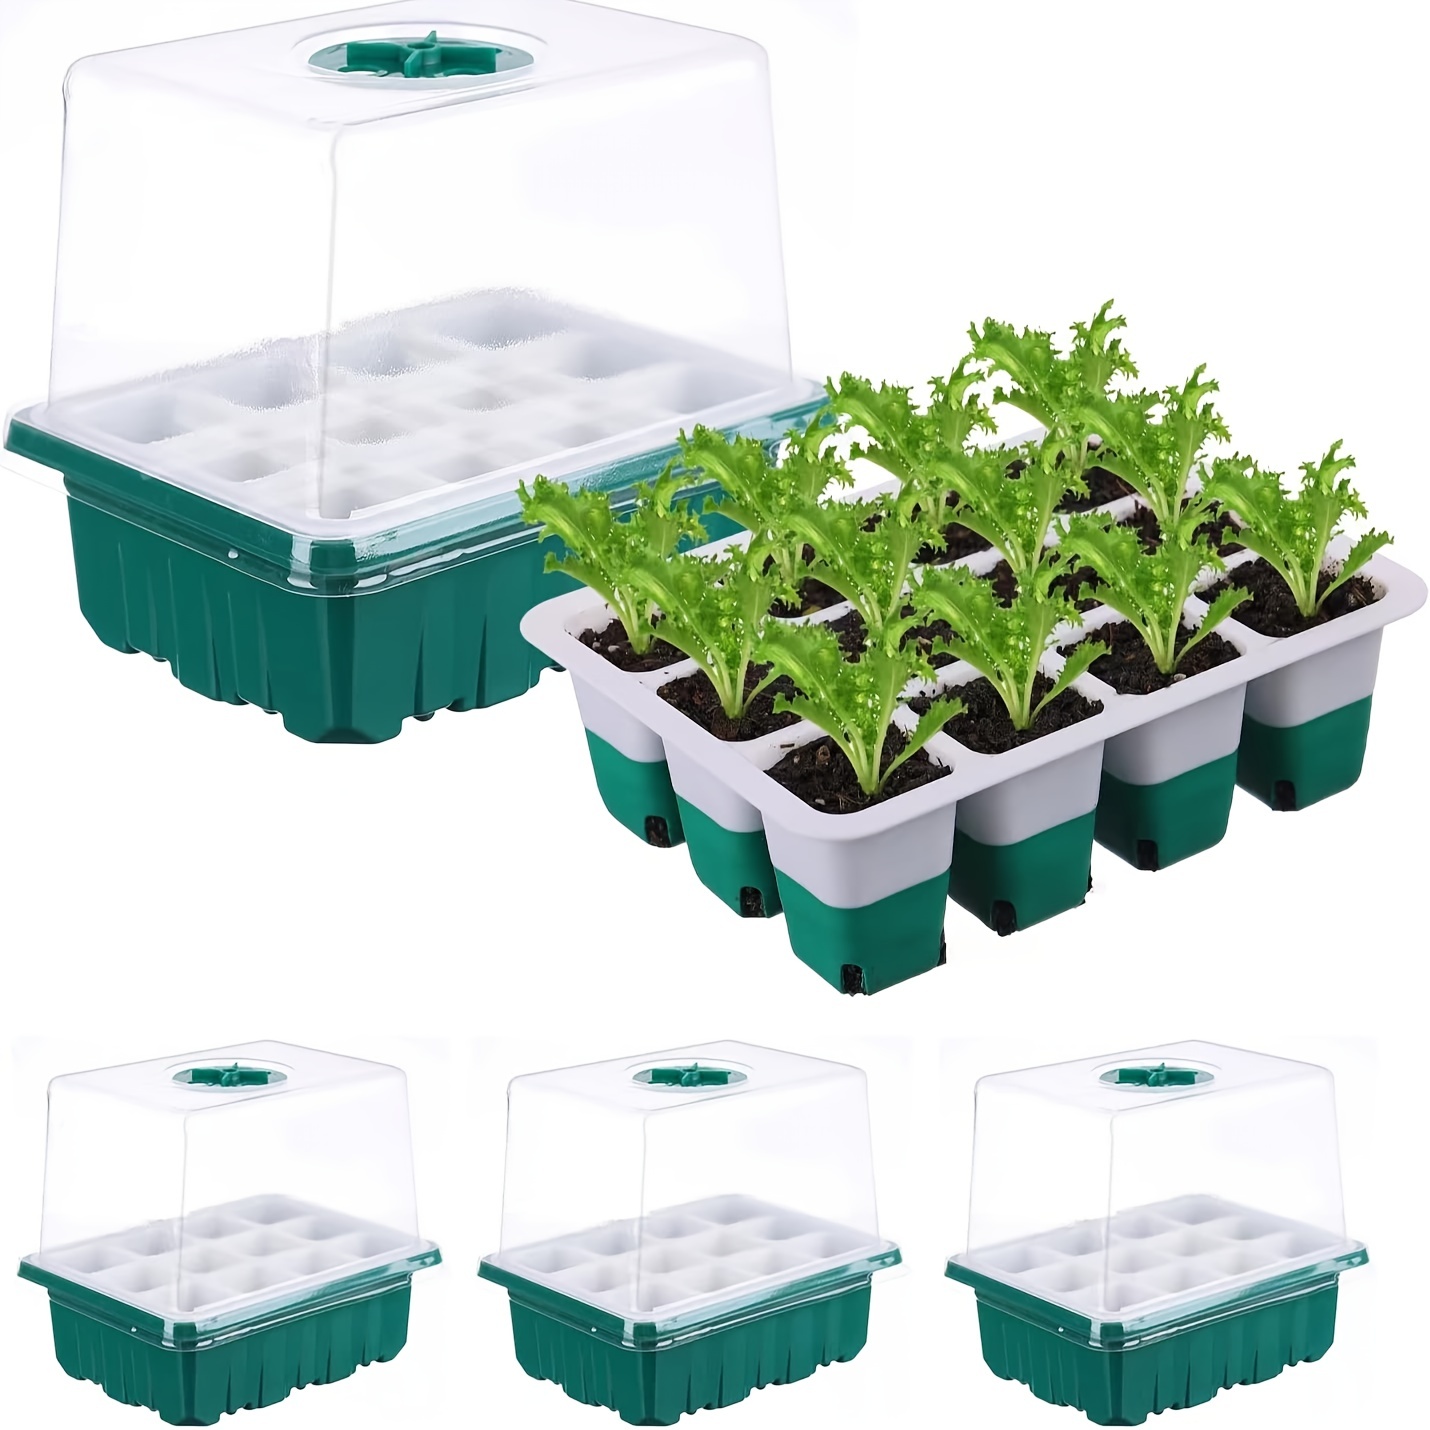 Seed Starter Tray with Grow Light 60 Flexible Cells 5 PCS Reusable Seedling